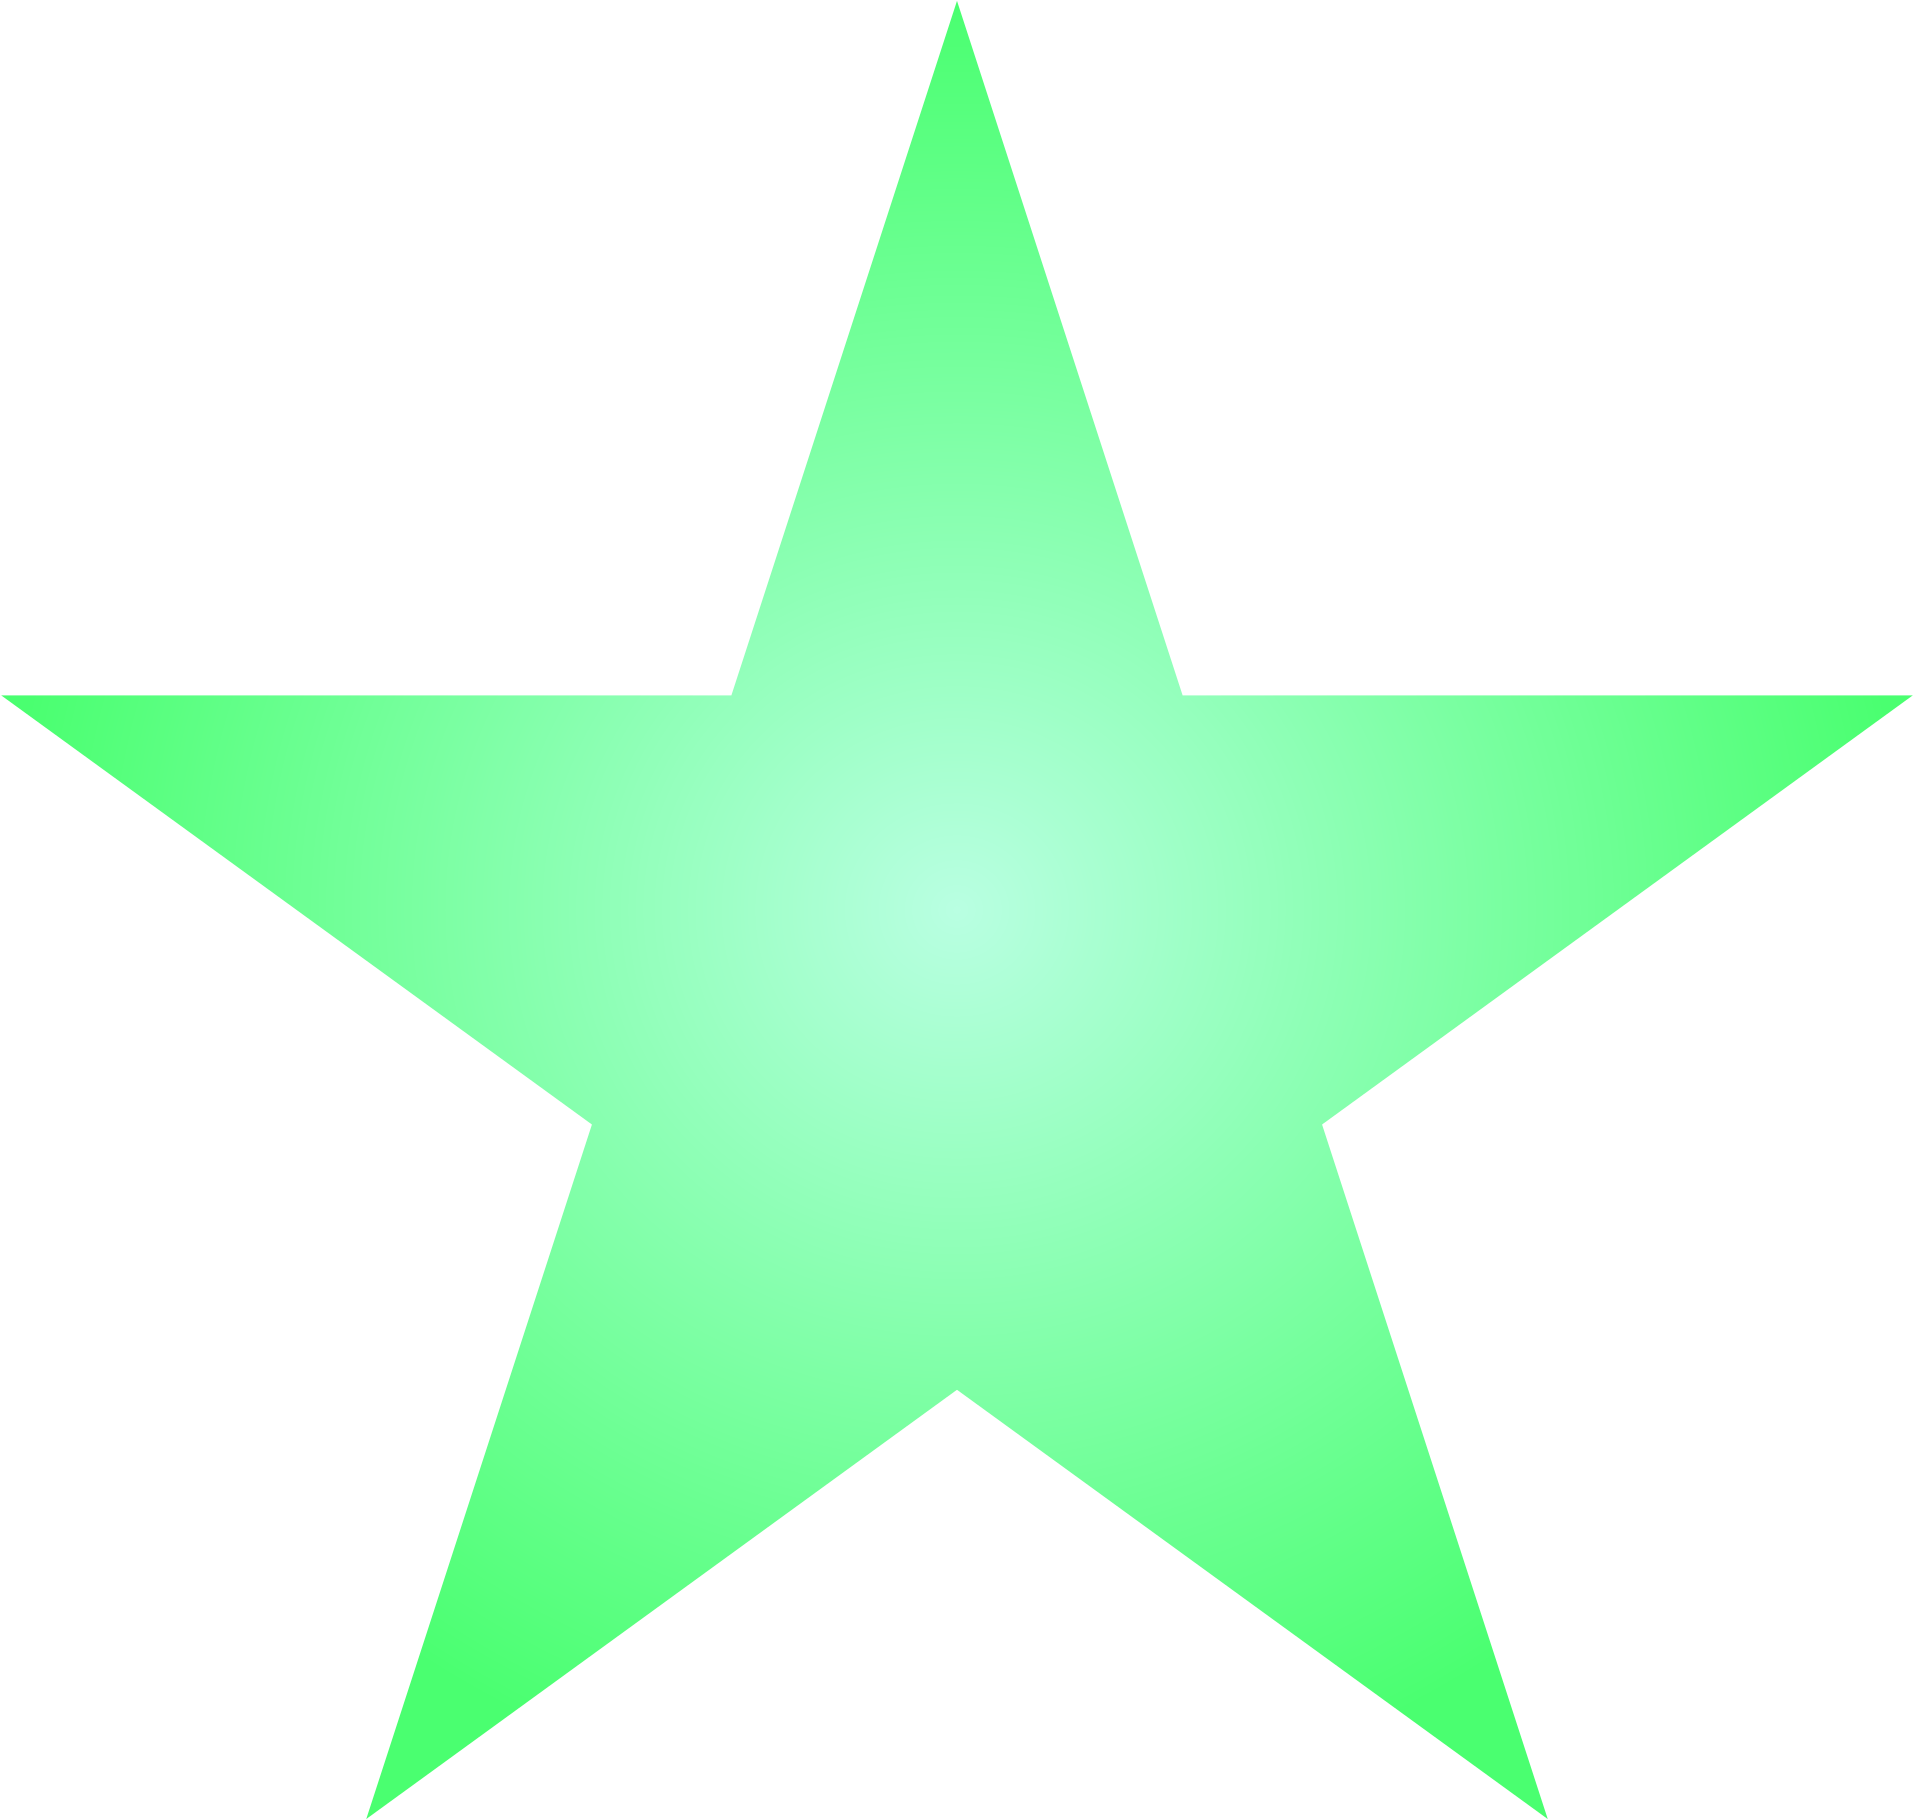 Green Star Images - Hollywood Star Sticker (2000x2000)